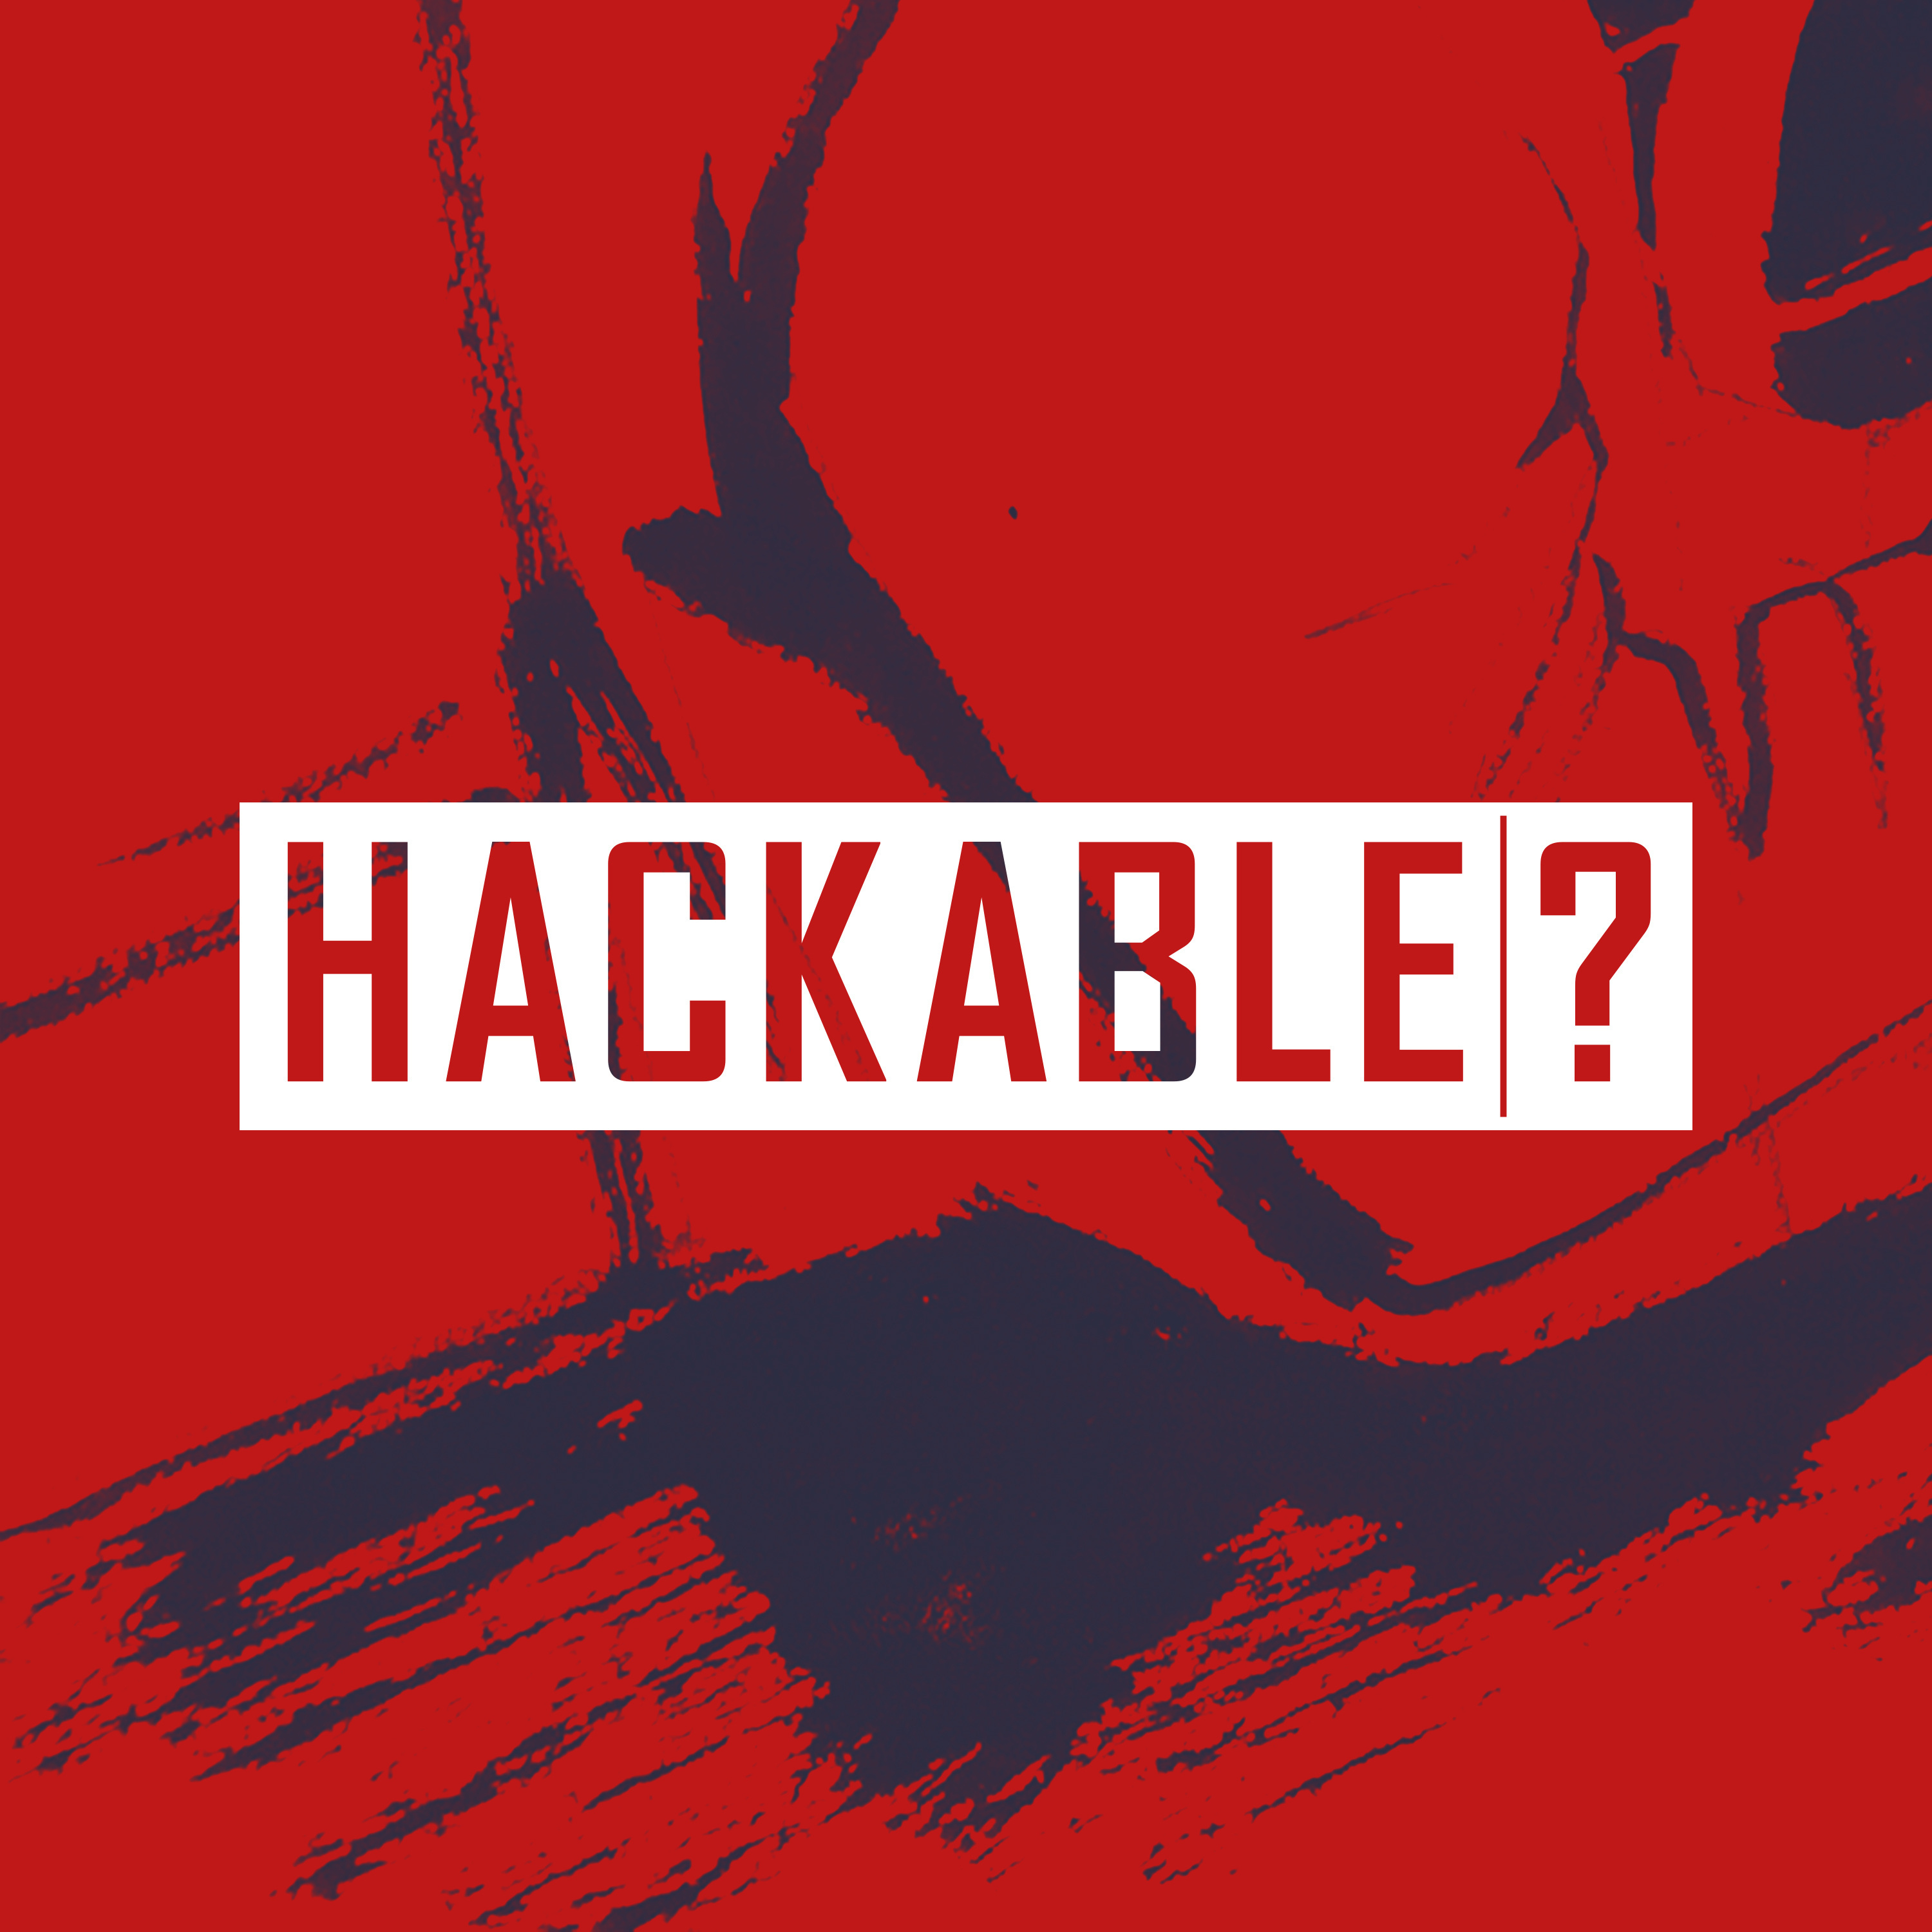 McAfee's Hackable? Podcast